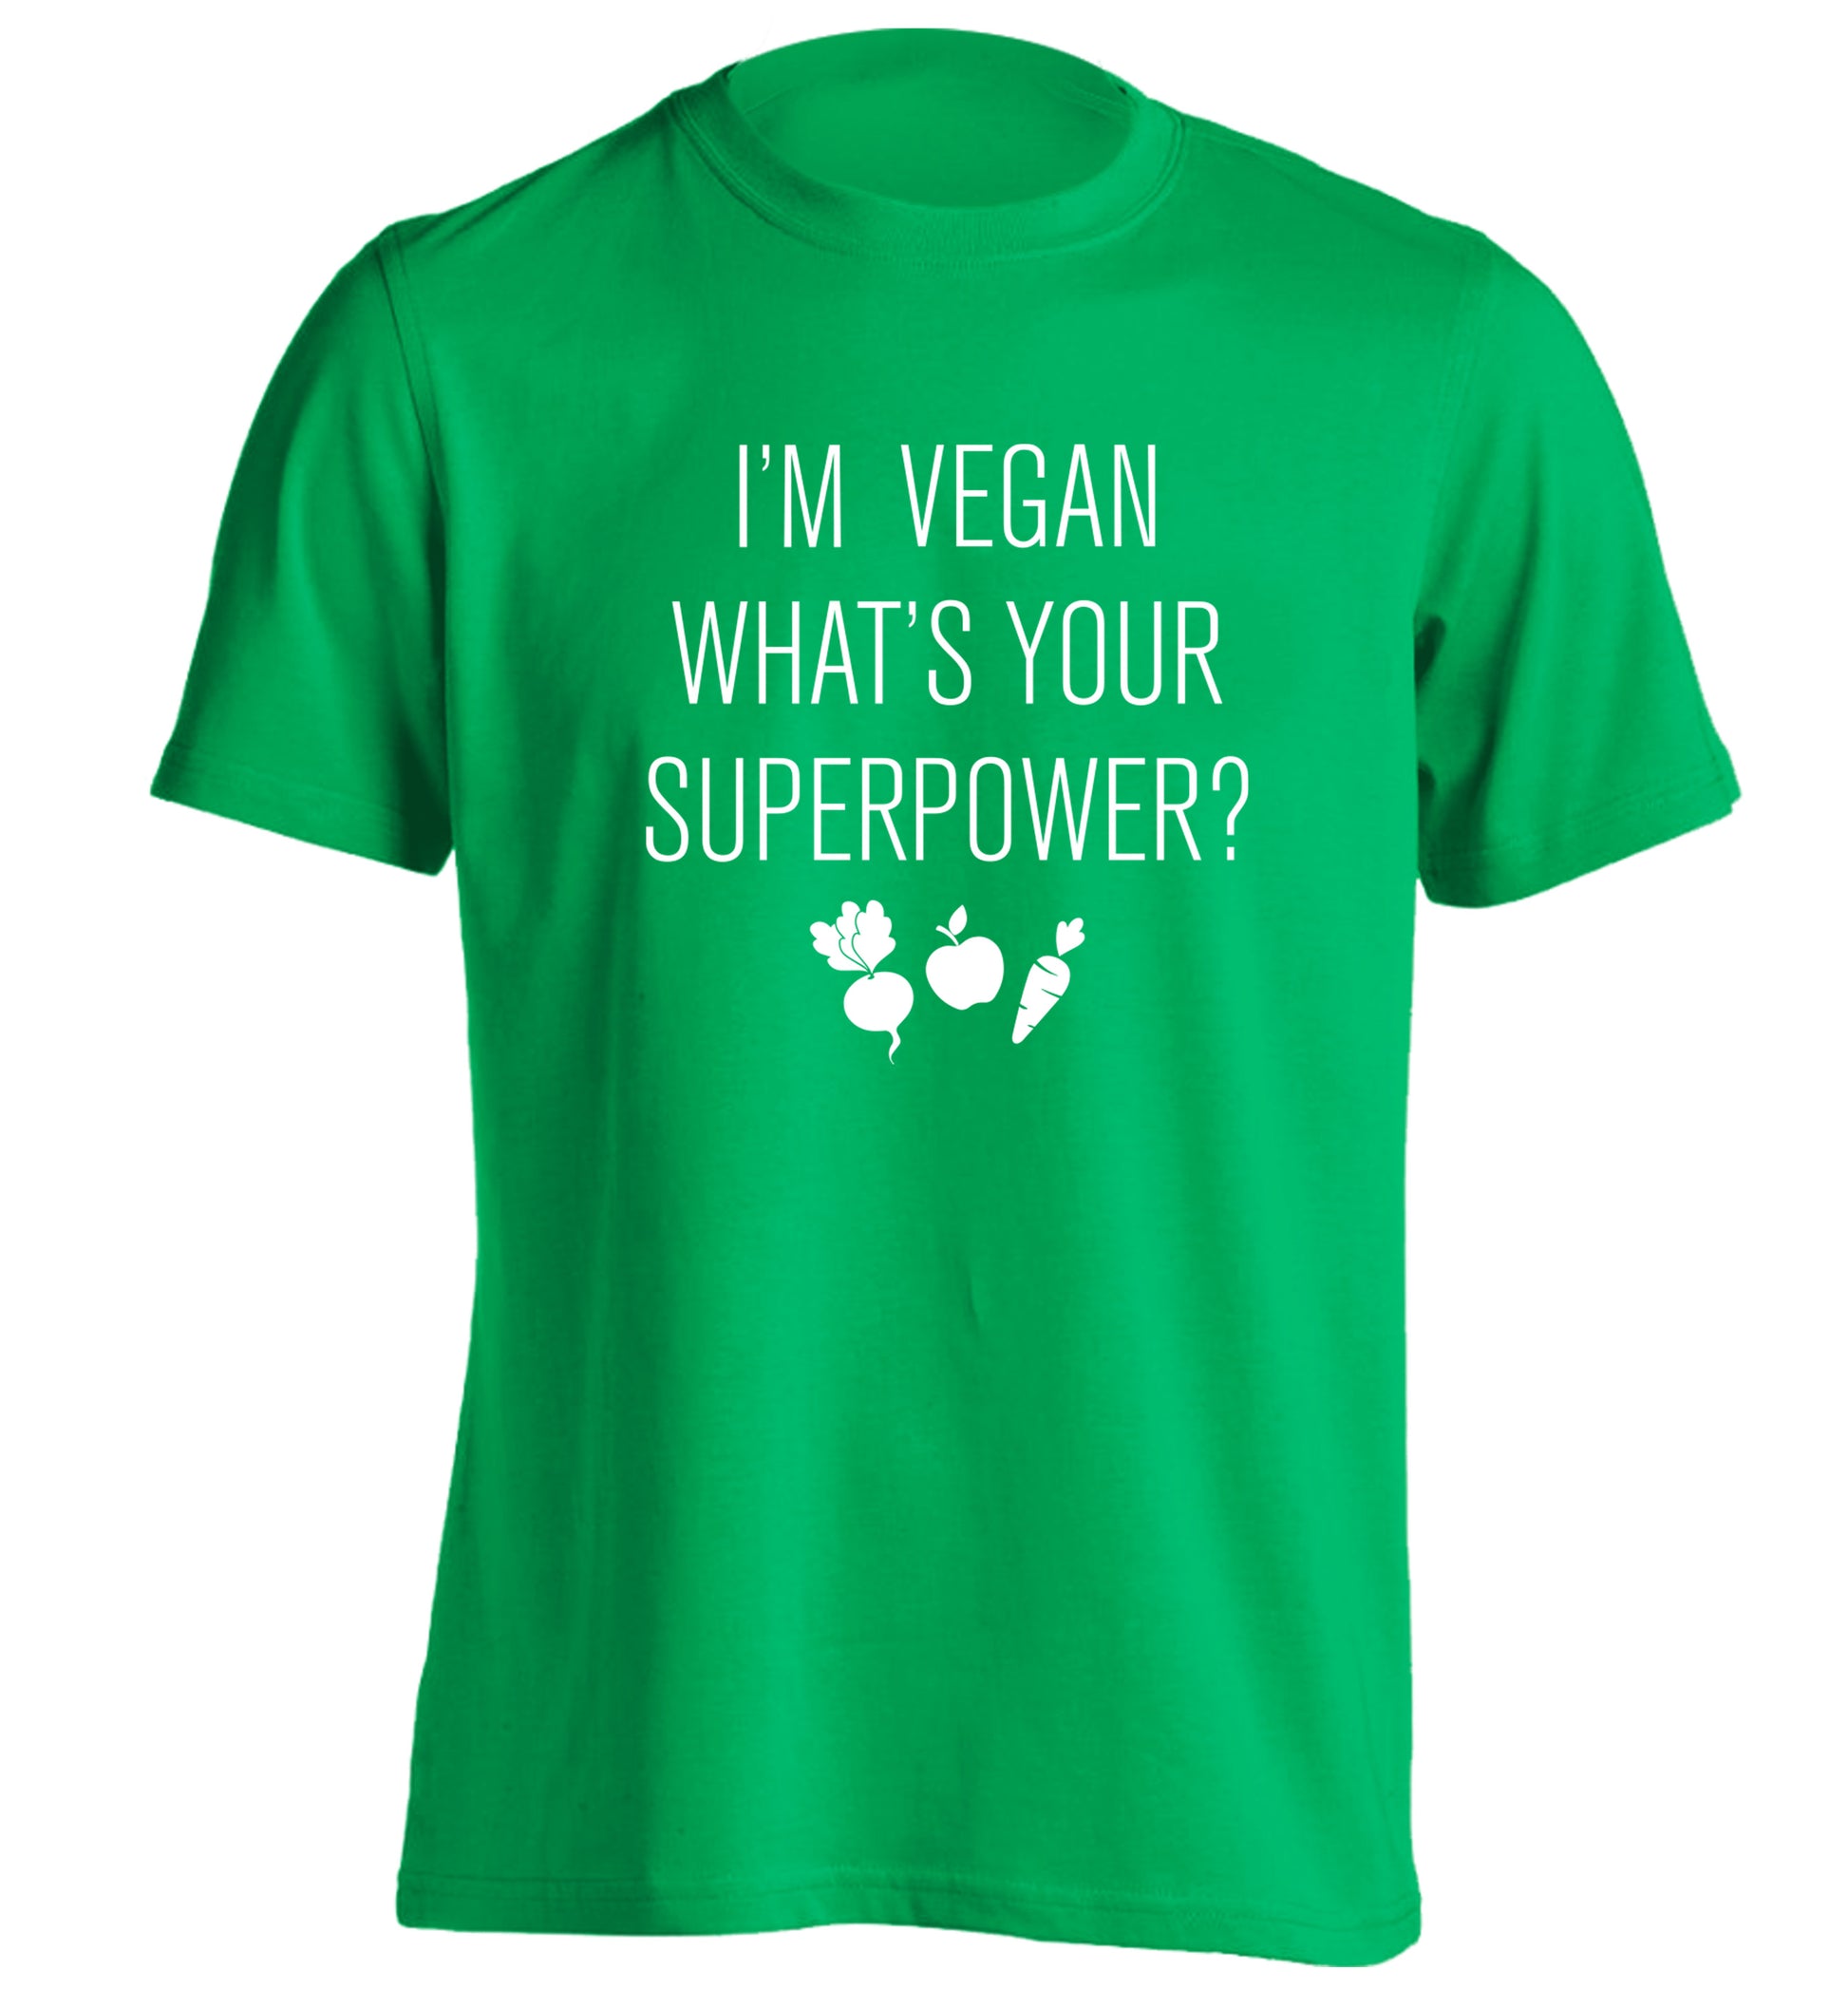 I'm Vegan What's Your Superpower? adults unisex green Tshirt 2XL